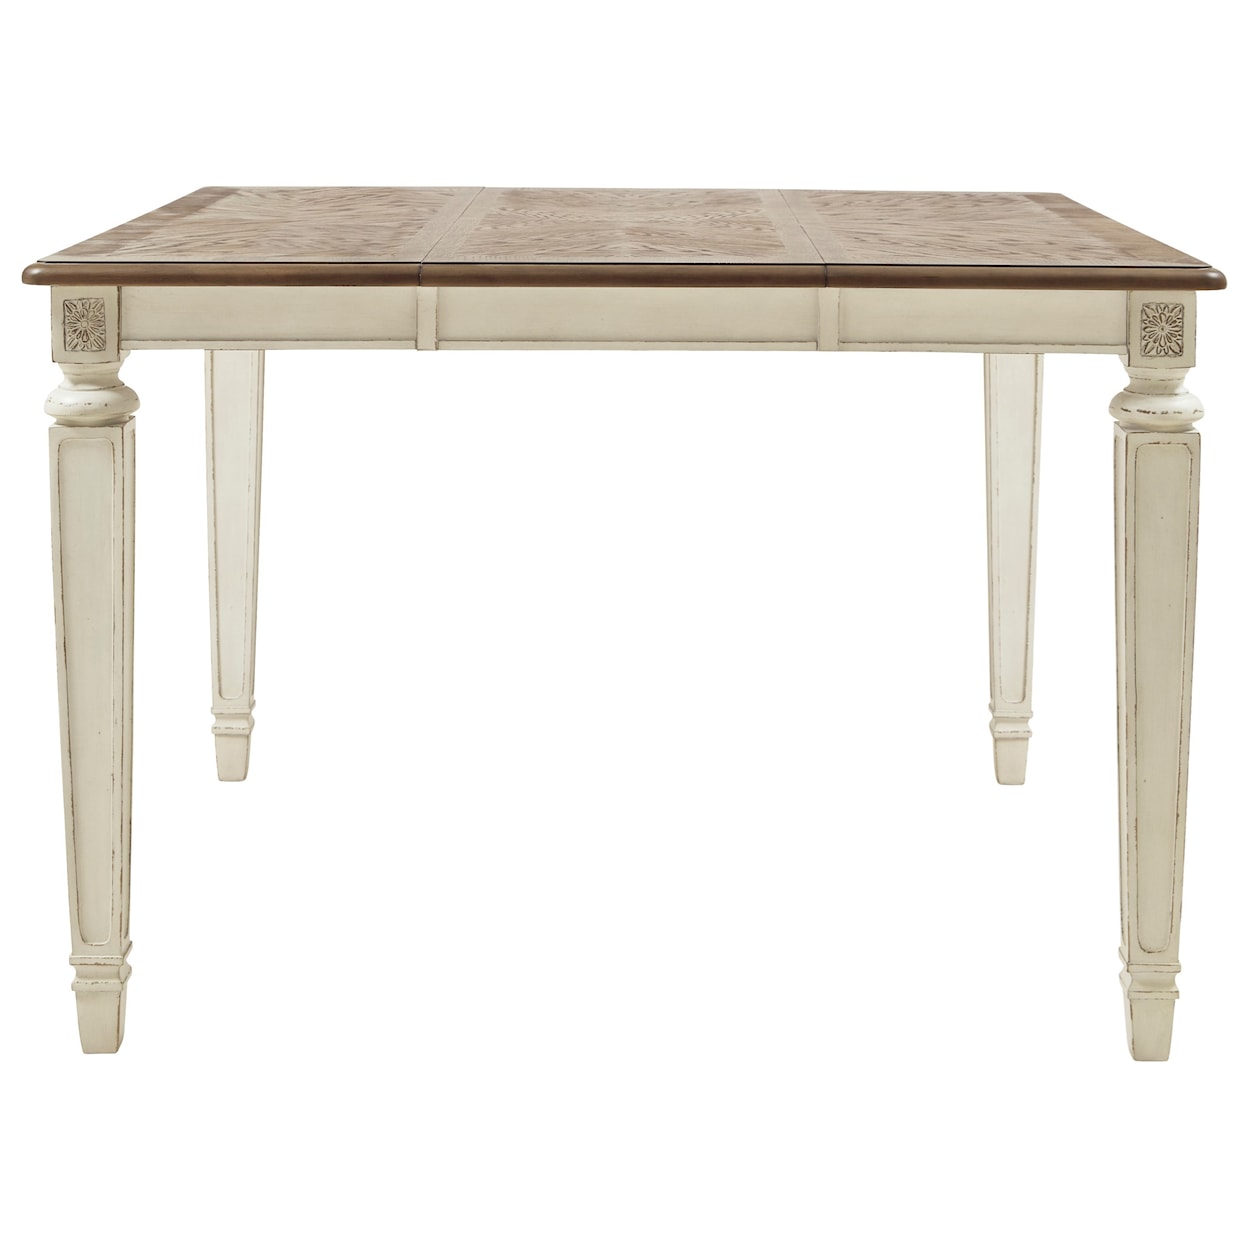 Signature Design by Ashley Realyn Square Counter Extension Table